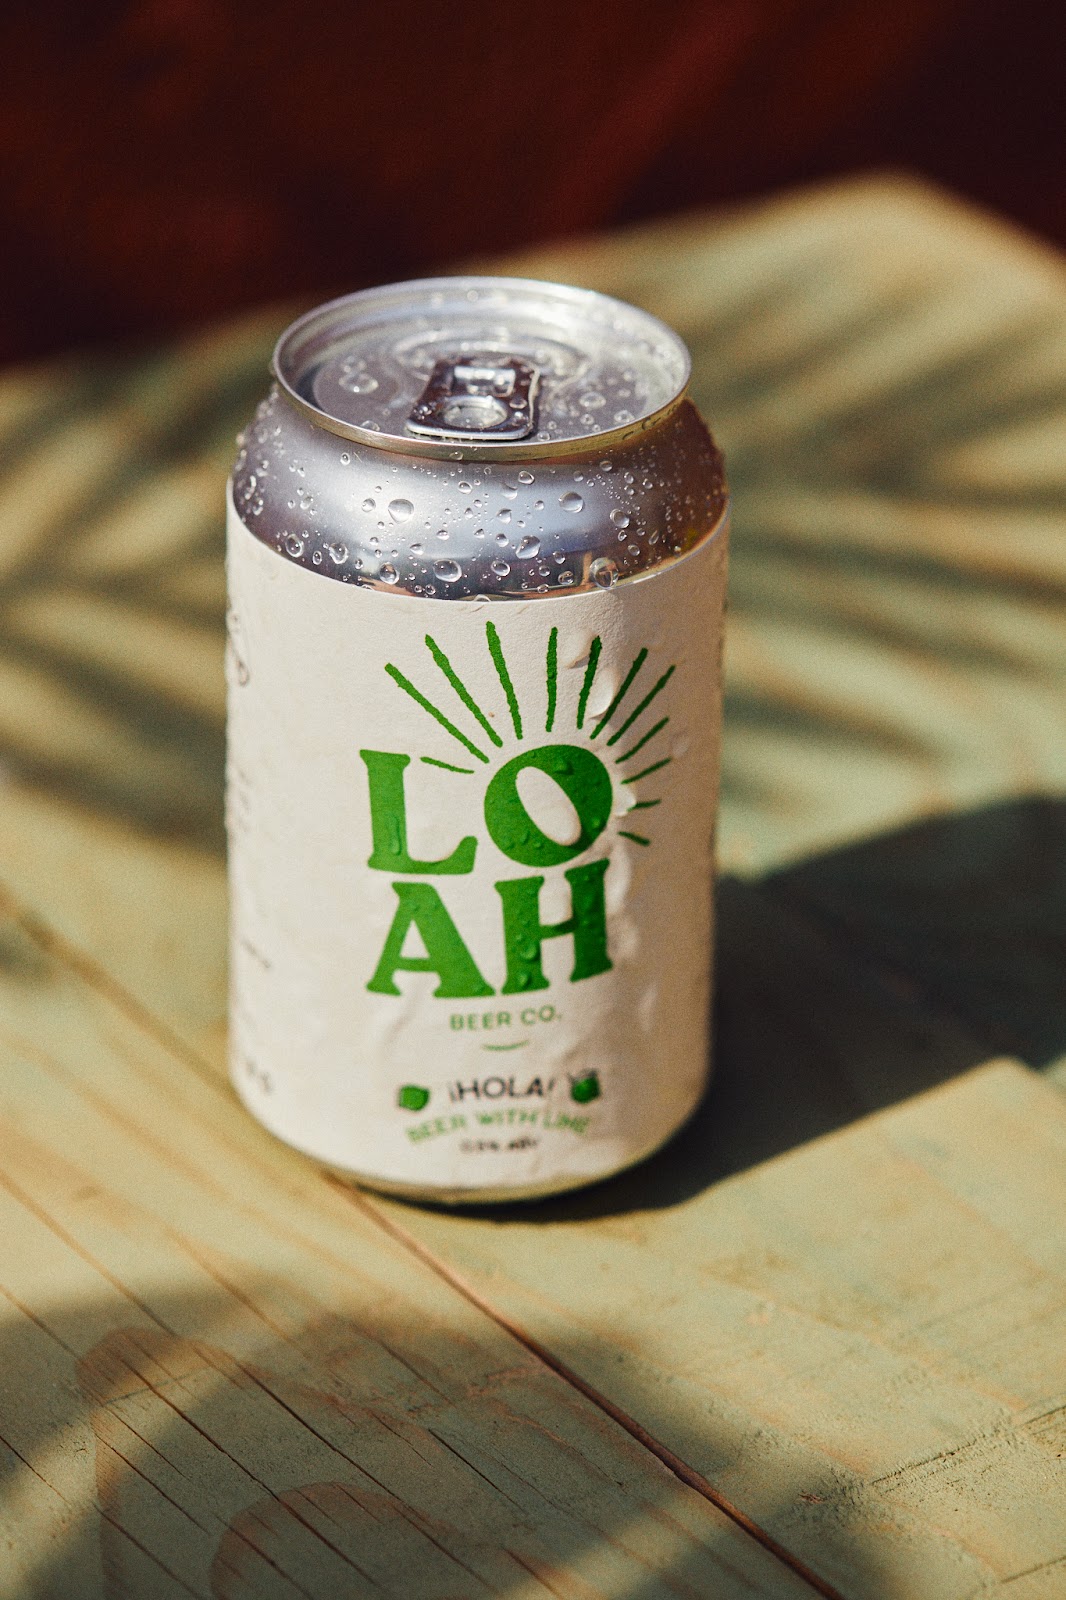 Loah Beer Co. introduces one of the healthiest low-alcohol beers